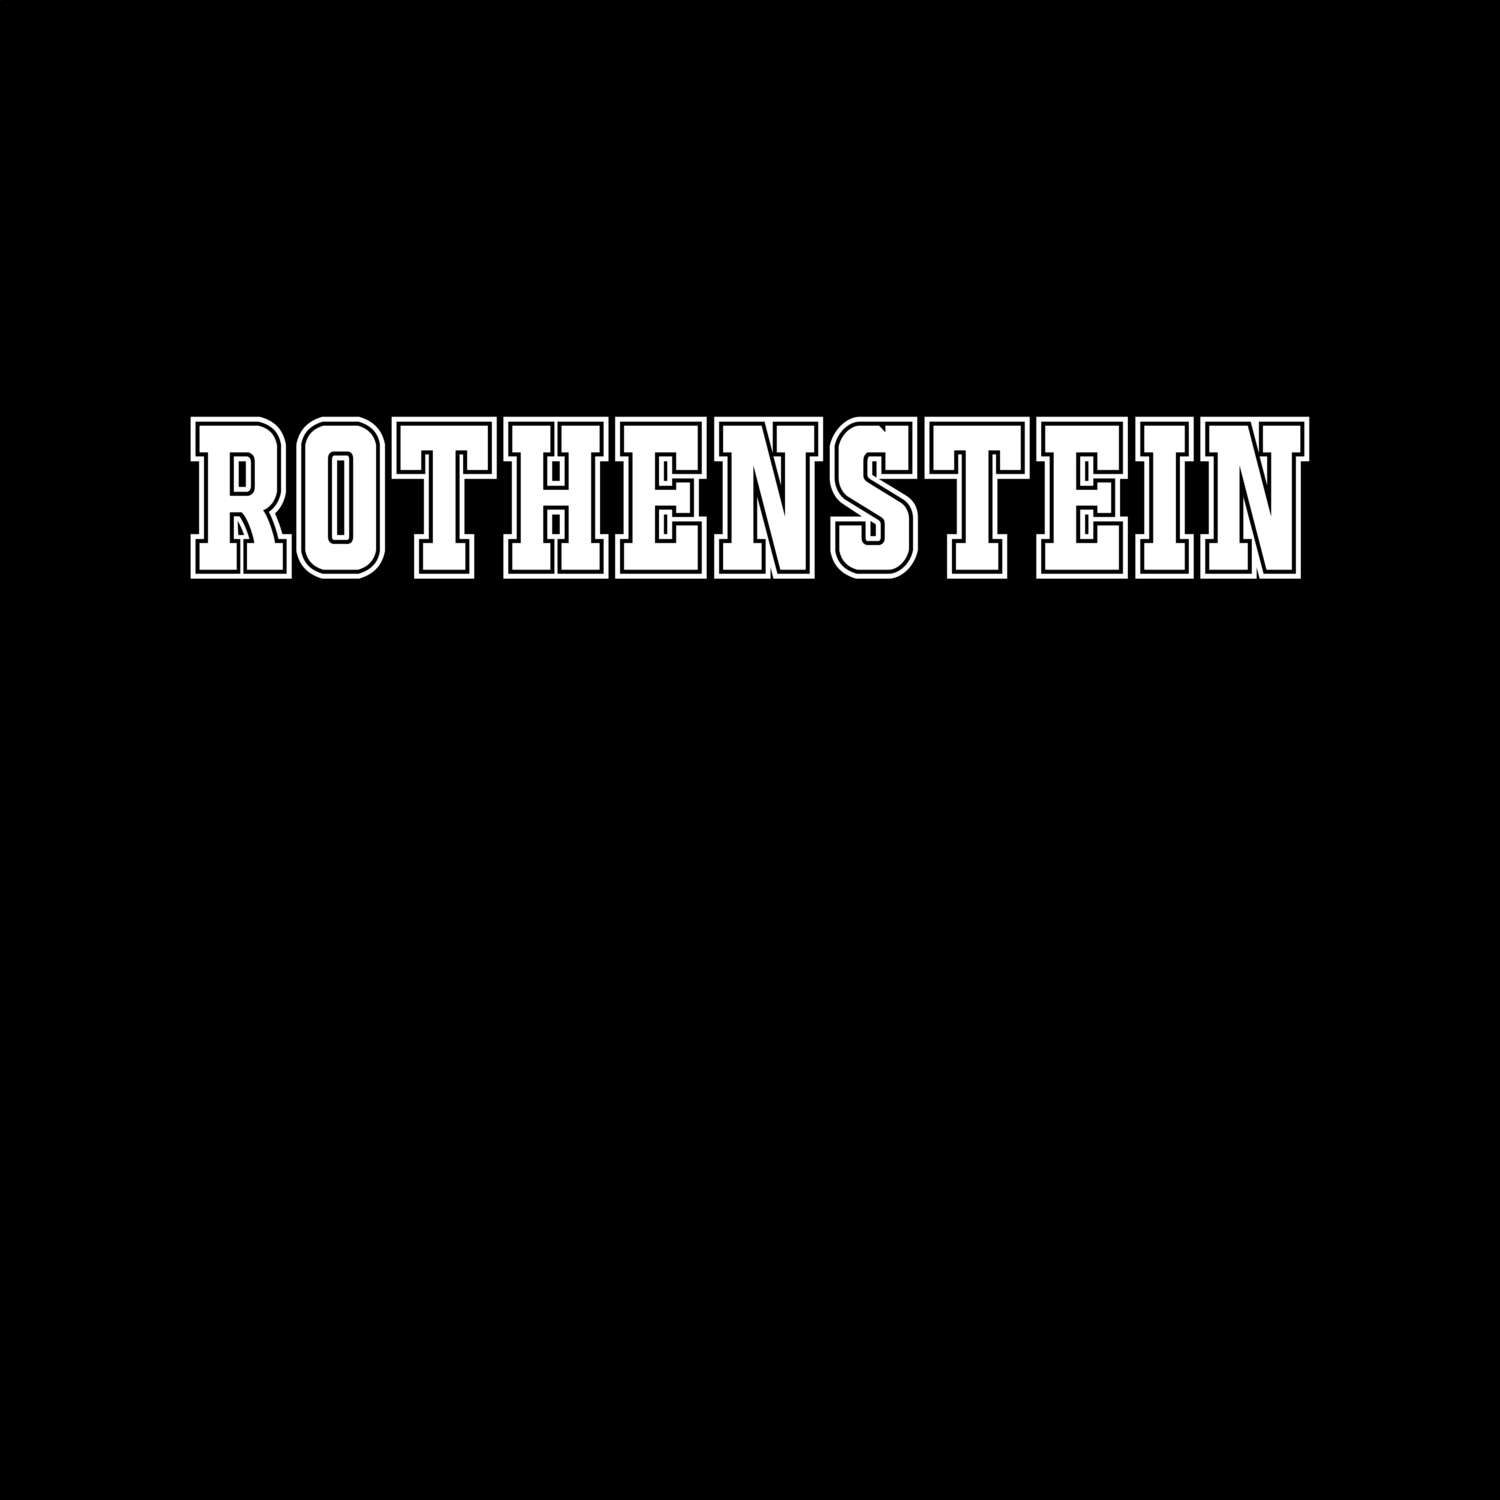 Rothenstein T-Shirt »Classic«